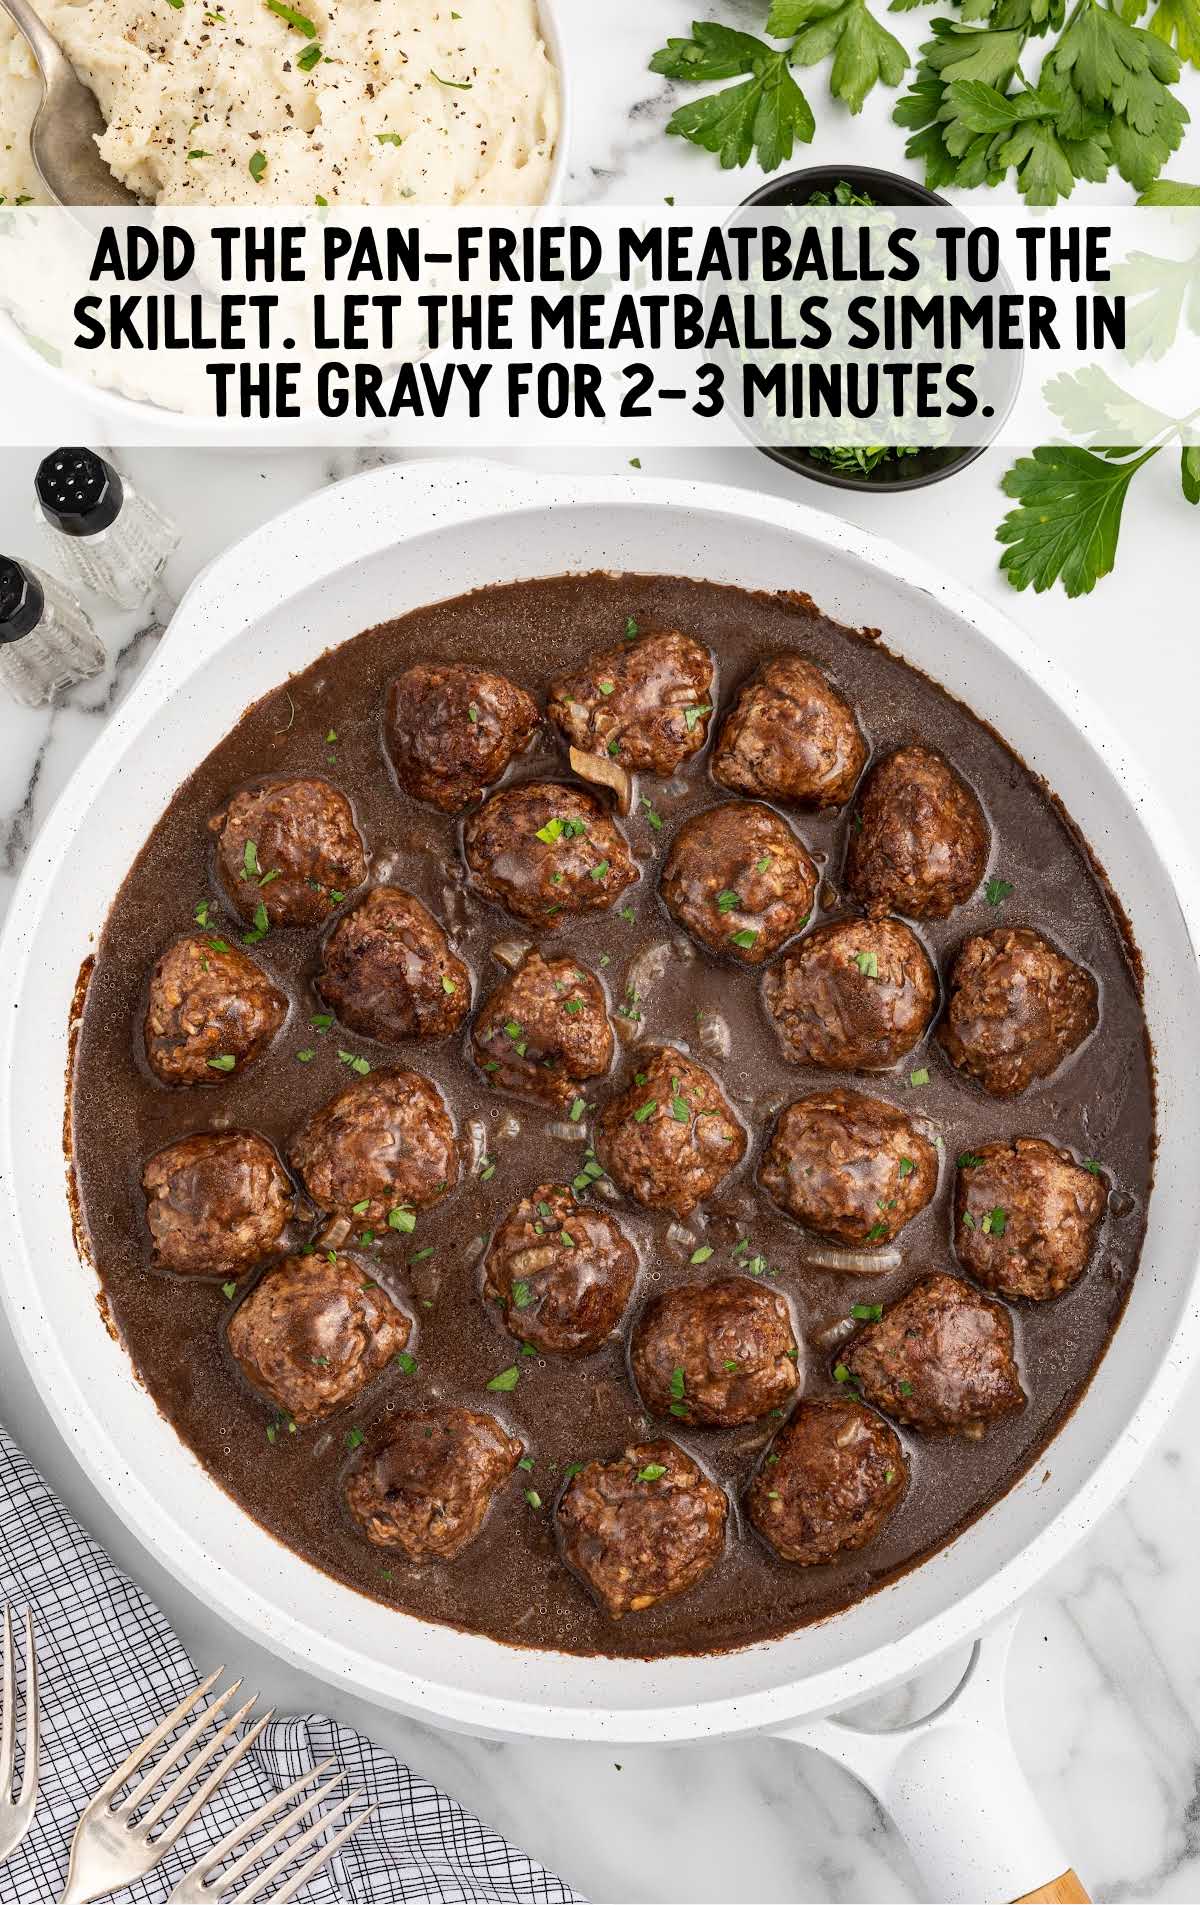 meatballs added to the skillet